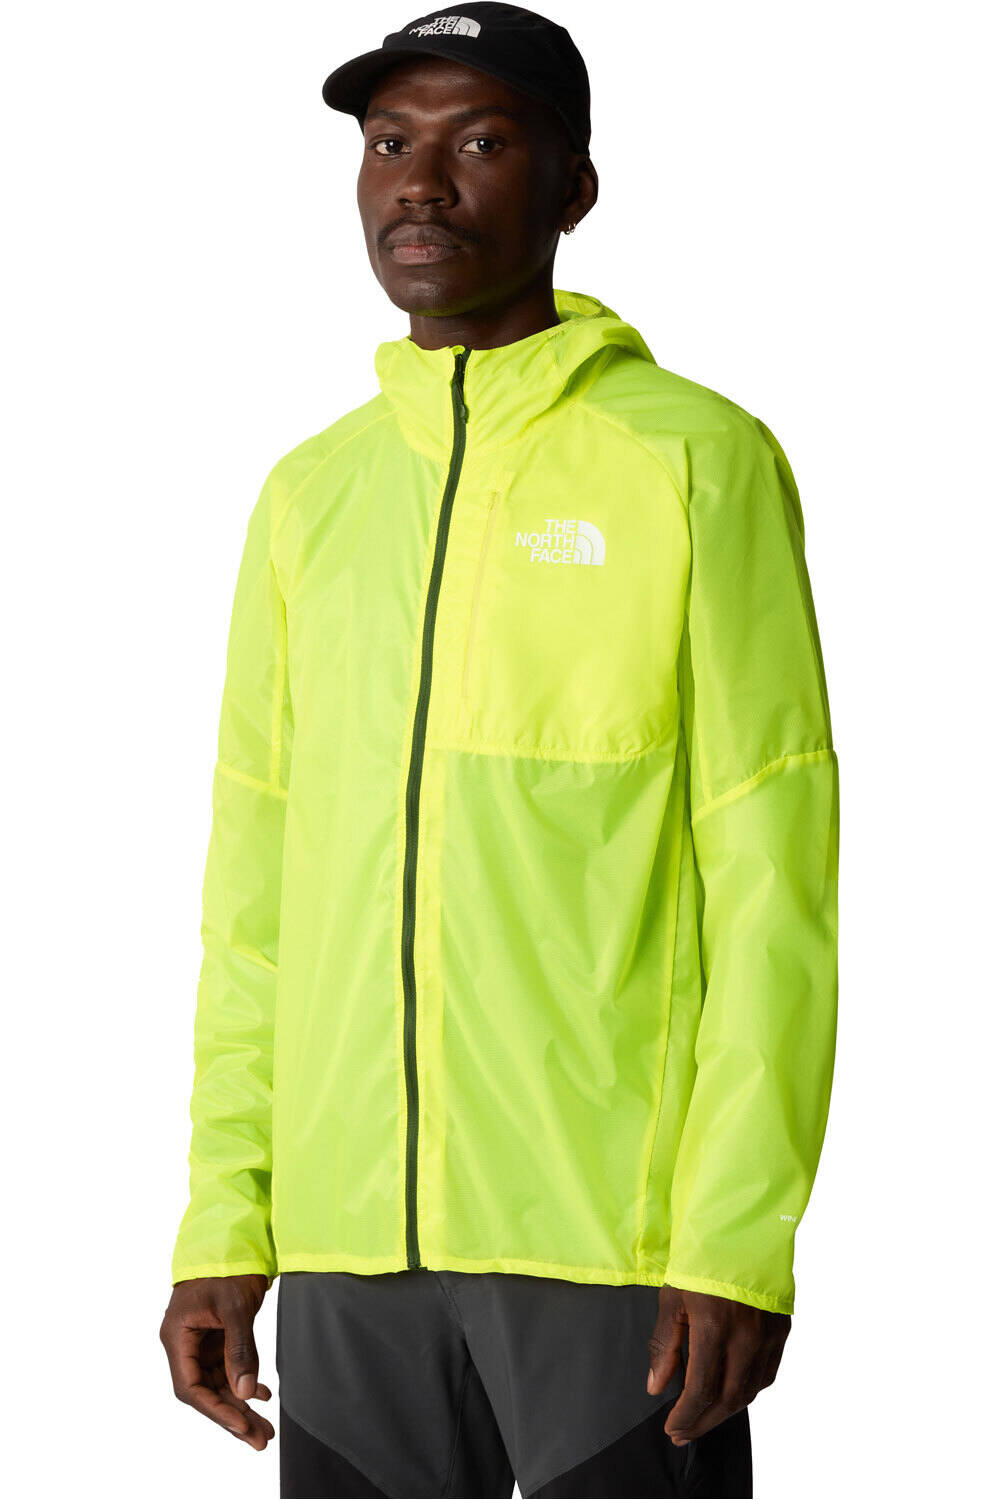 The North Face chaqueta impermeable hombre M WINDSTREAM SHELL vista frontal